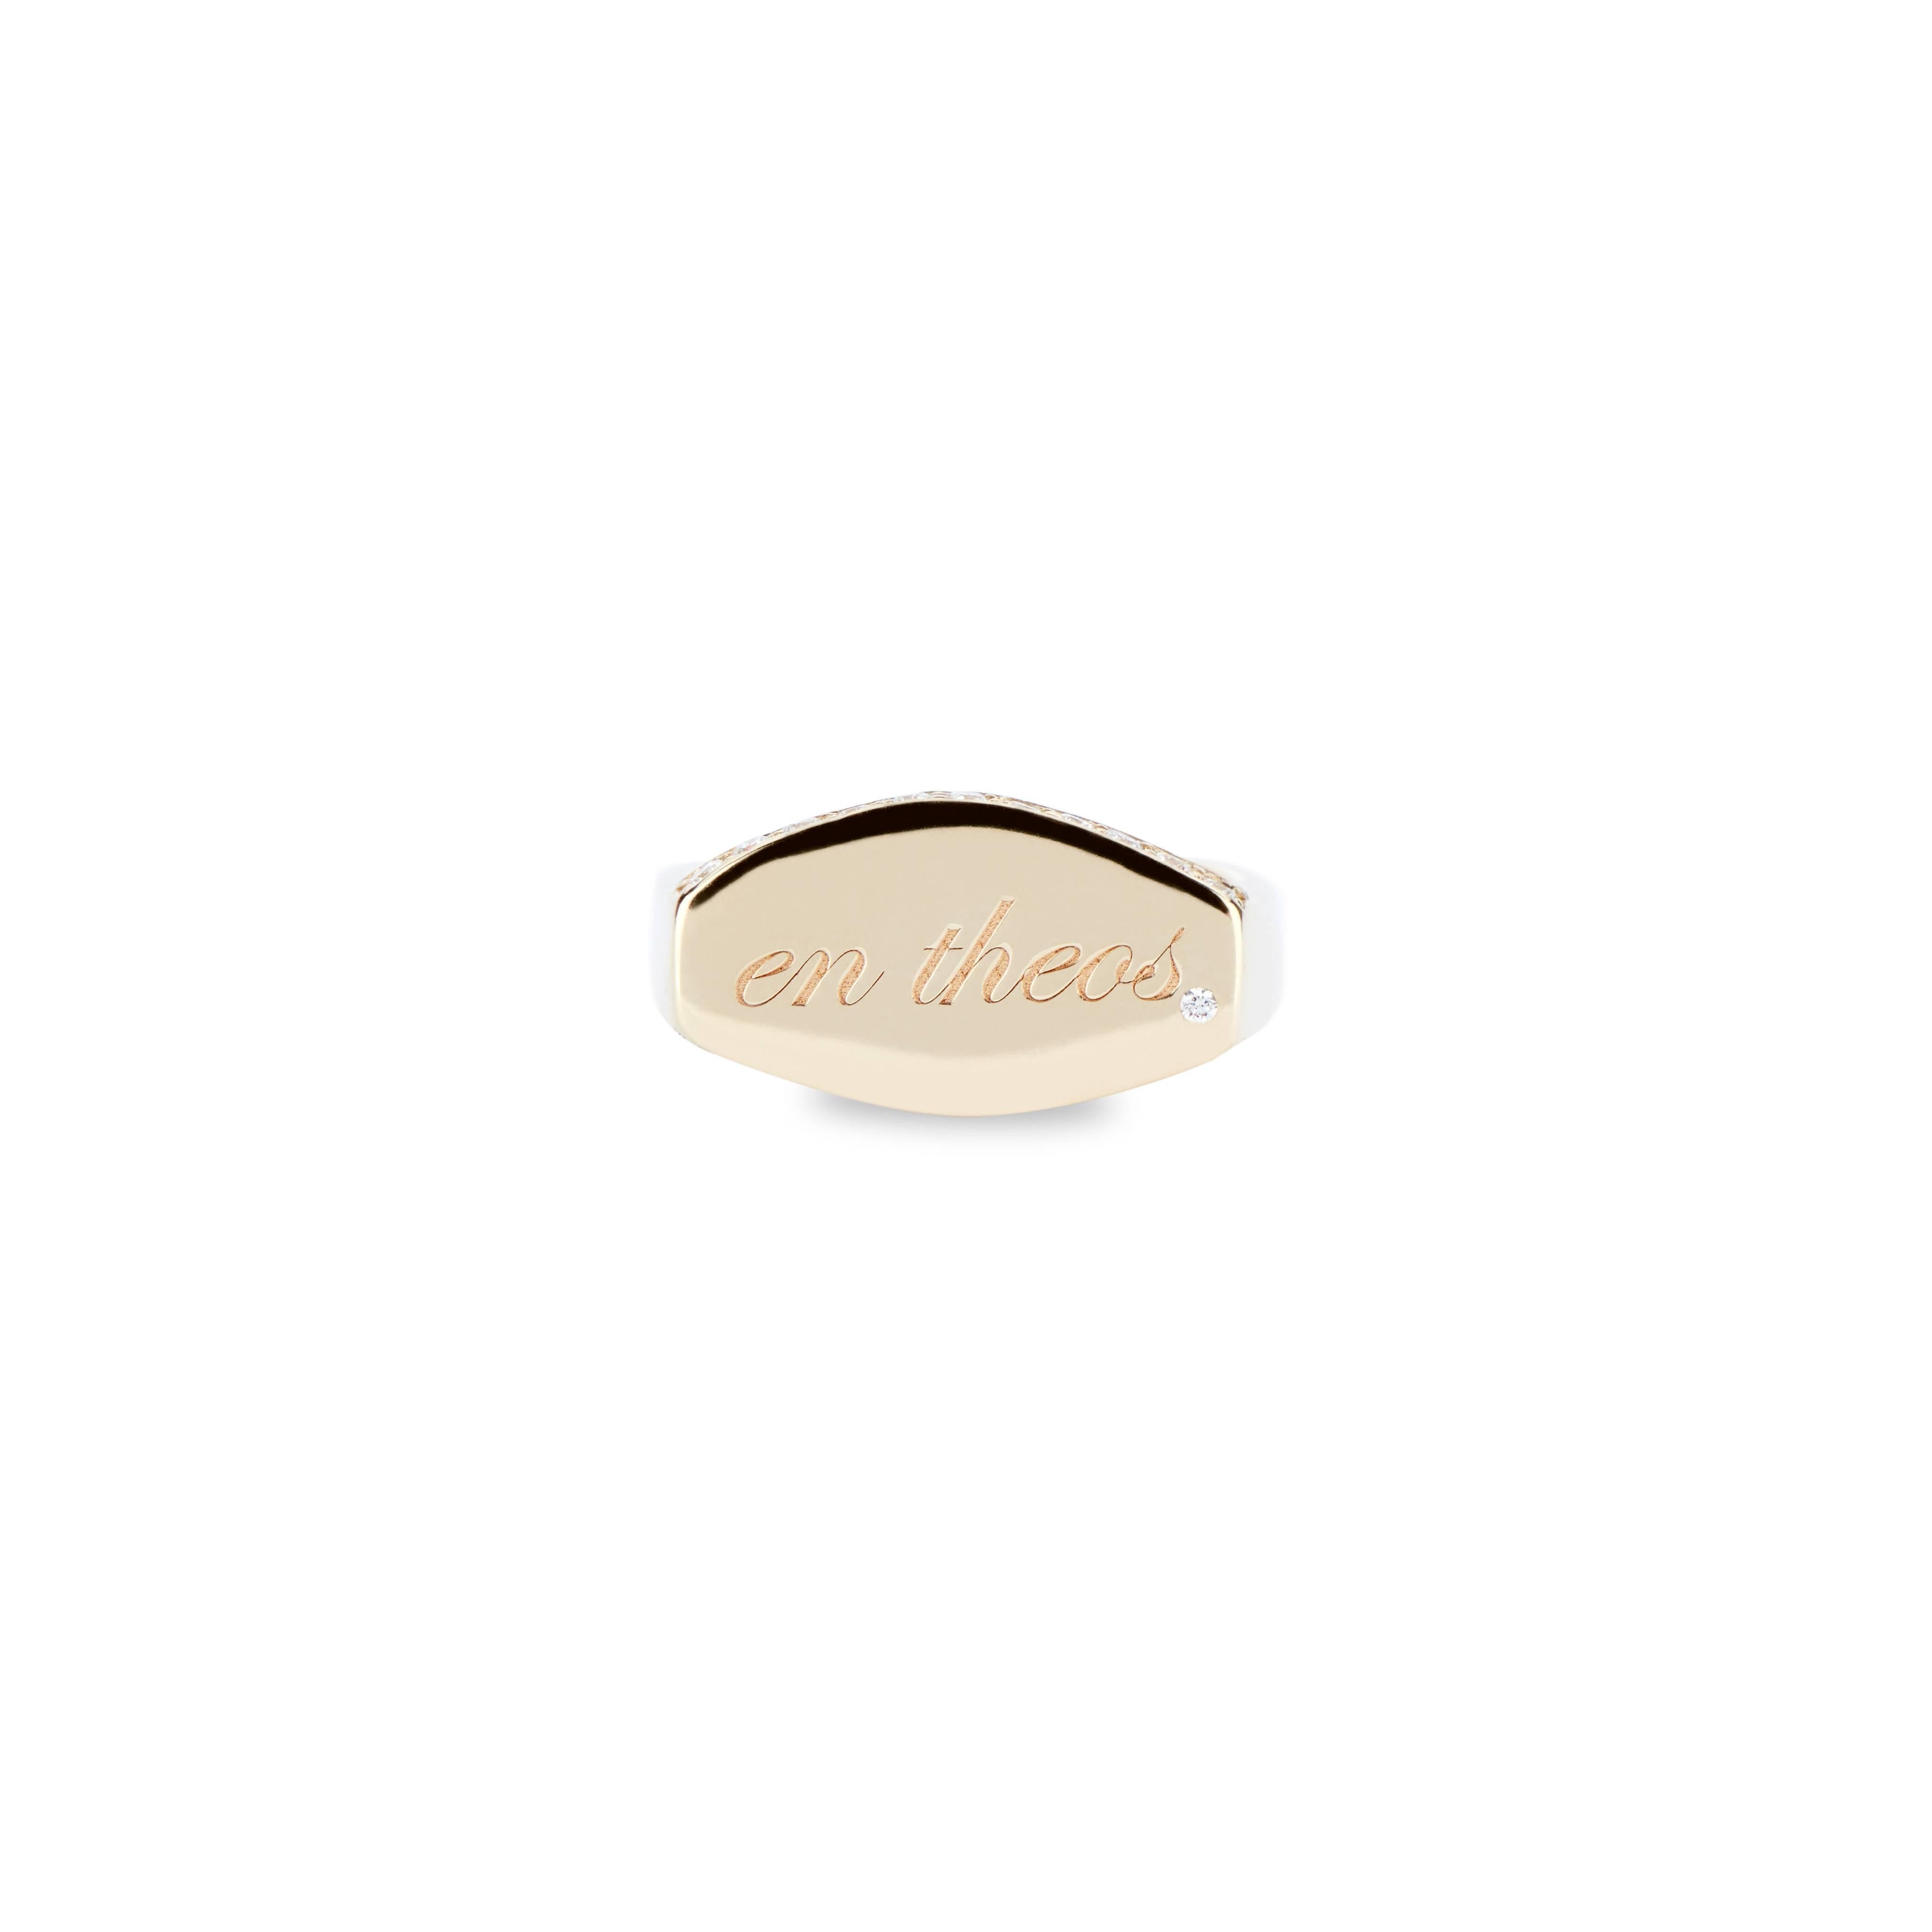 Wear this 14k rose gold and black diamond signet ring as a reminder of the power of exuberance.  